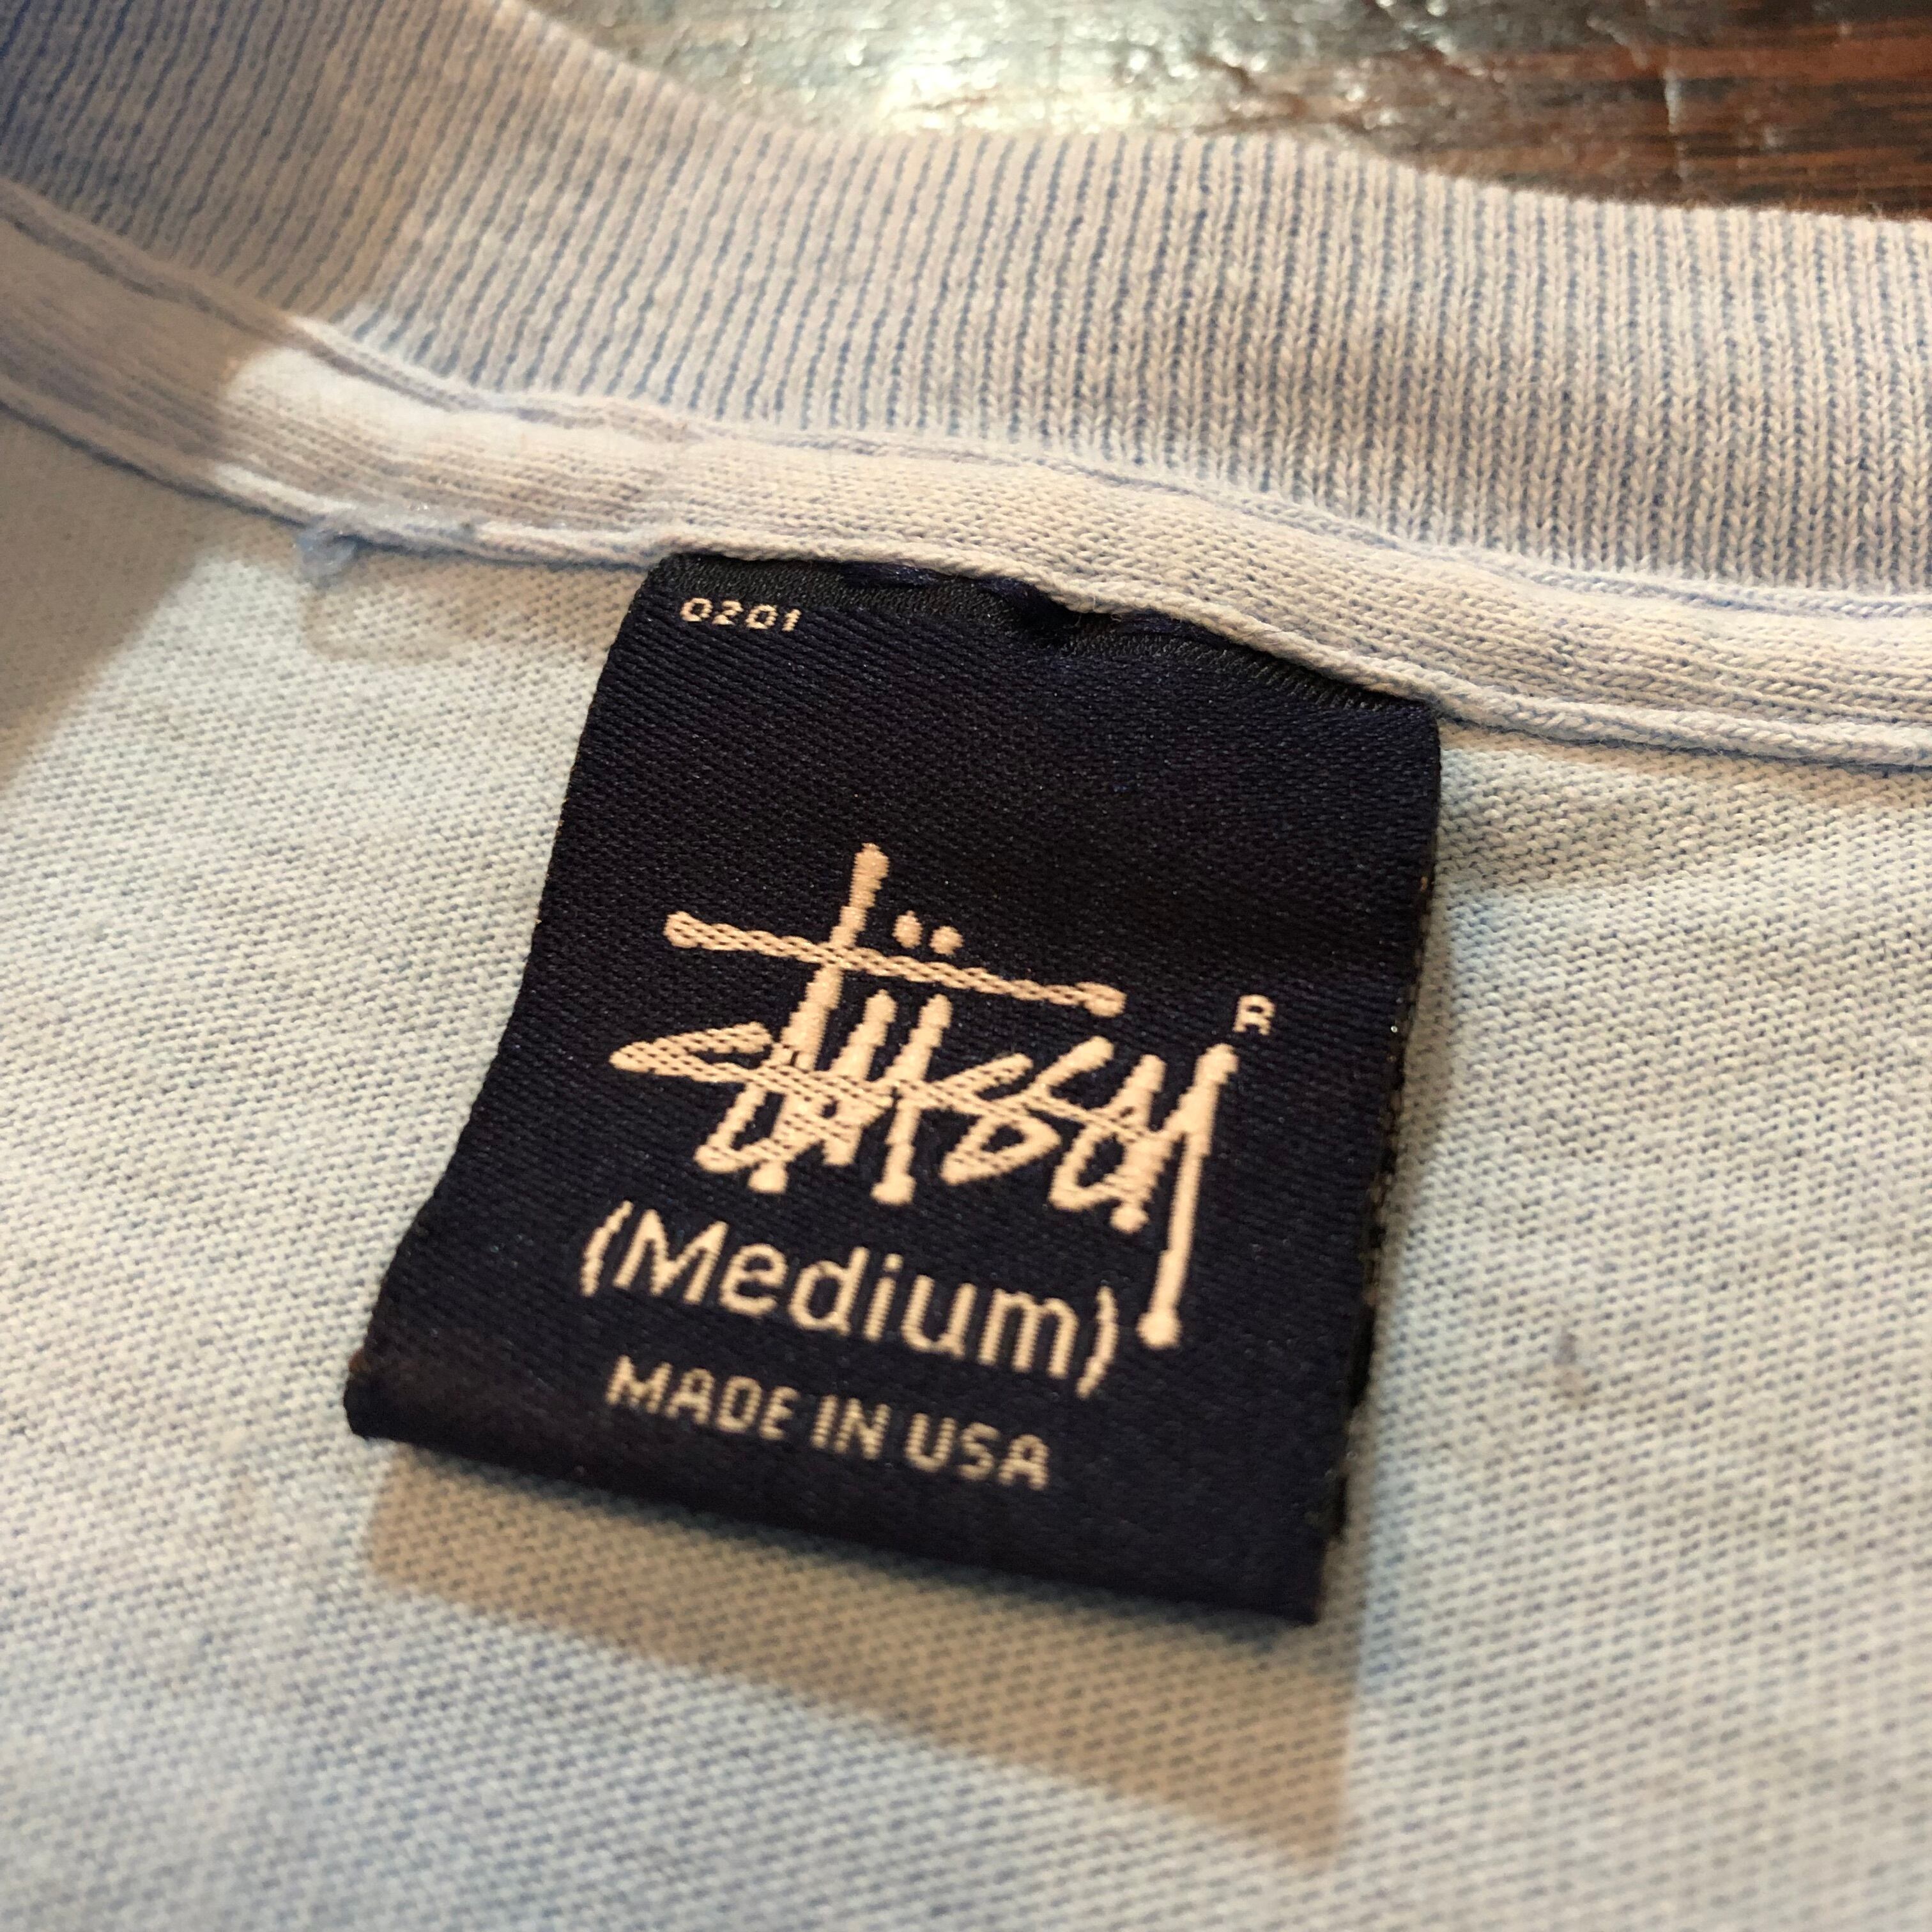 Made in USA” old stussy 紺タグ ビーニー カーキ-